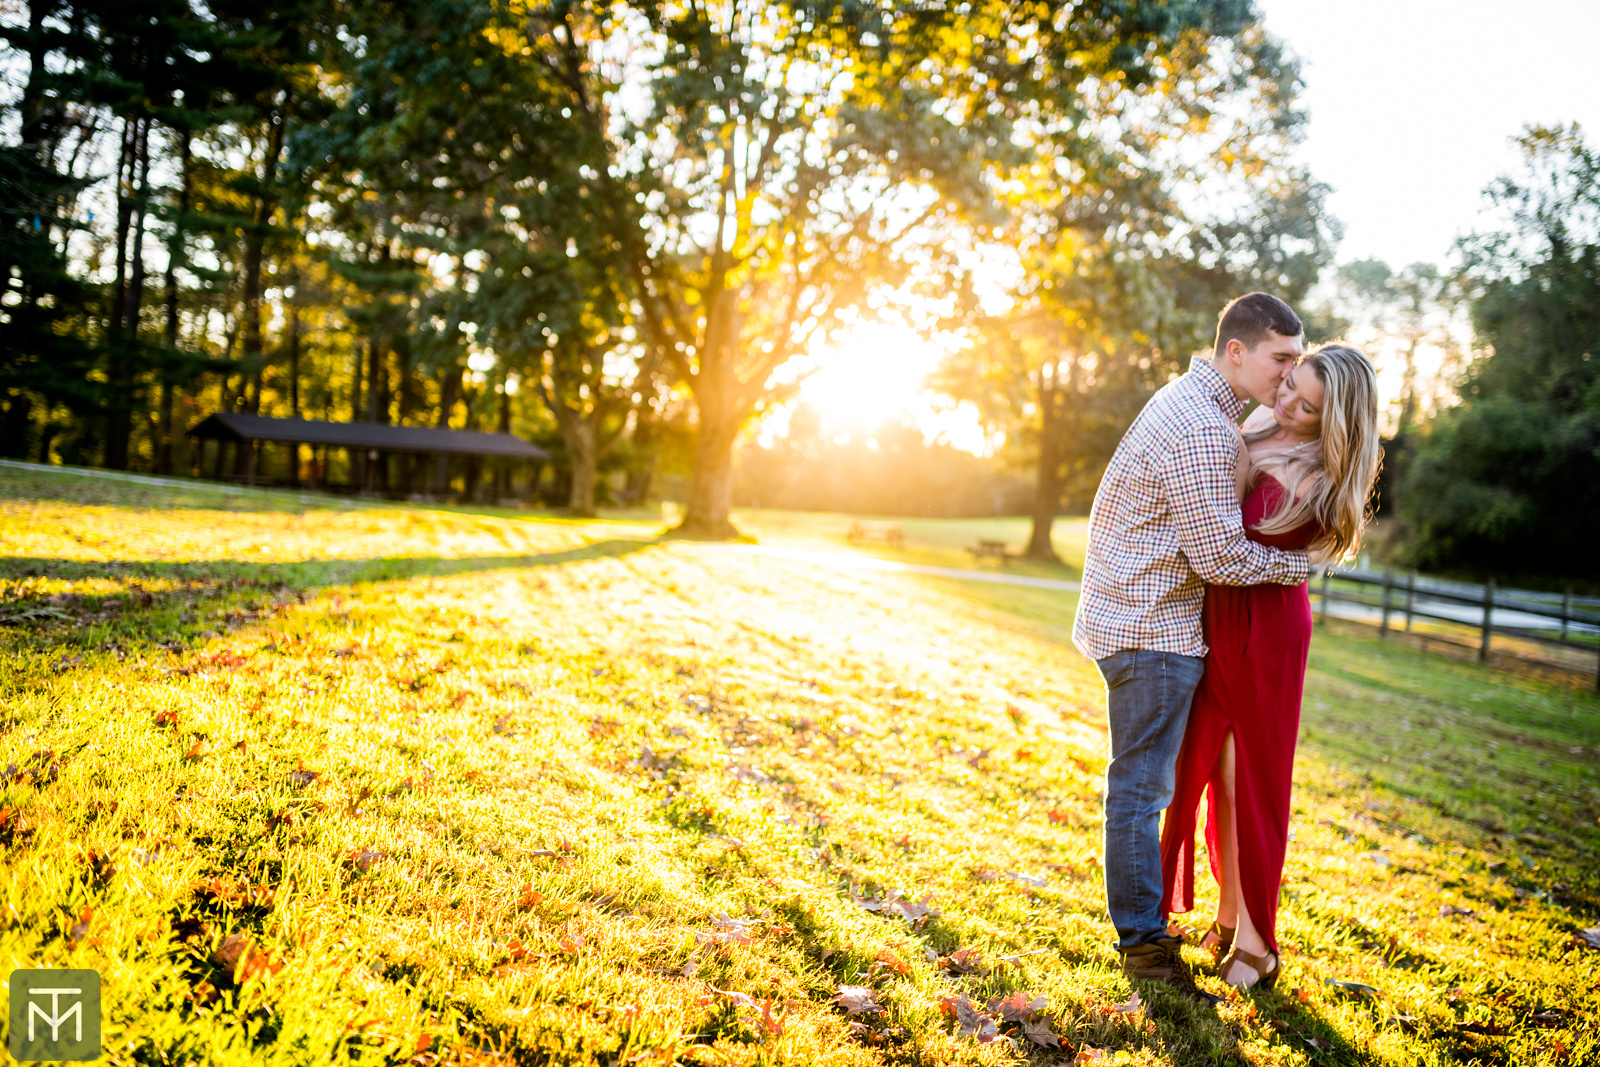 Justin & Cait {Esession by Tessa}